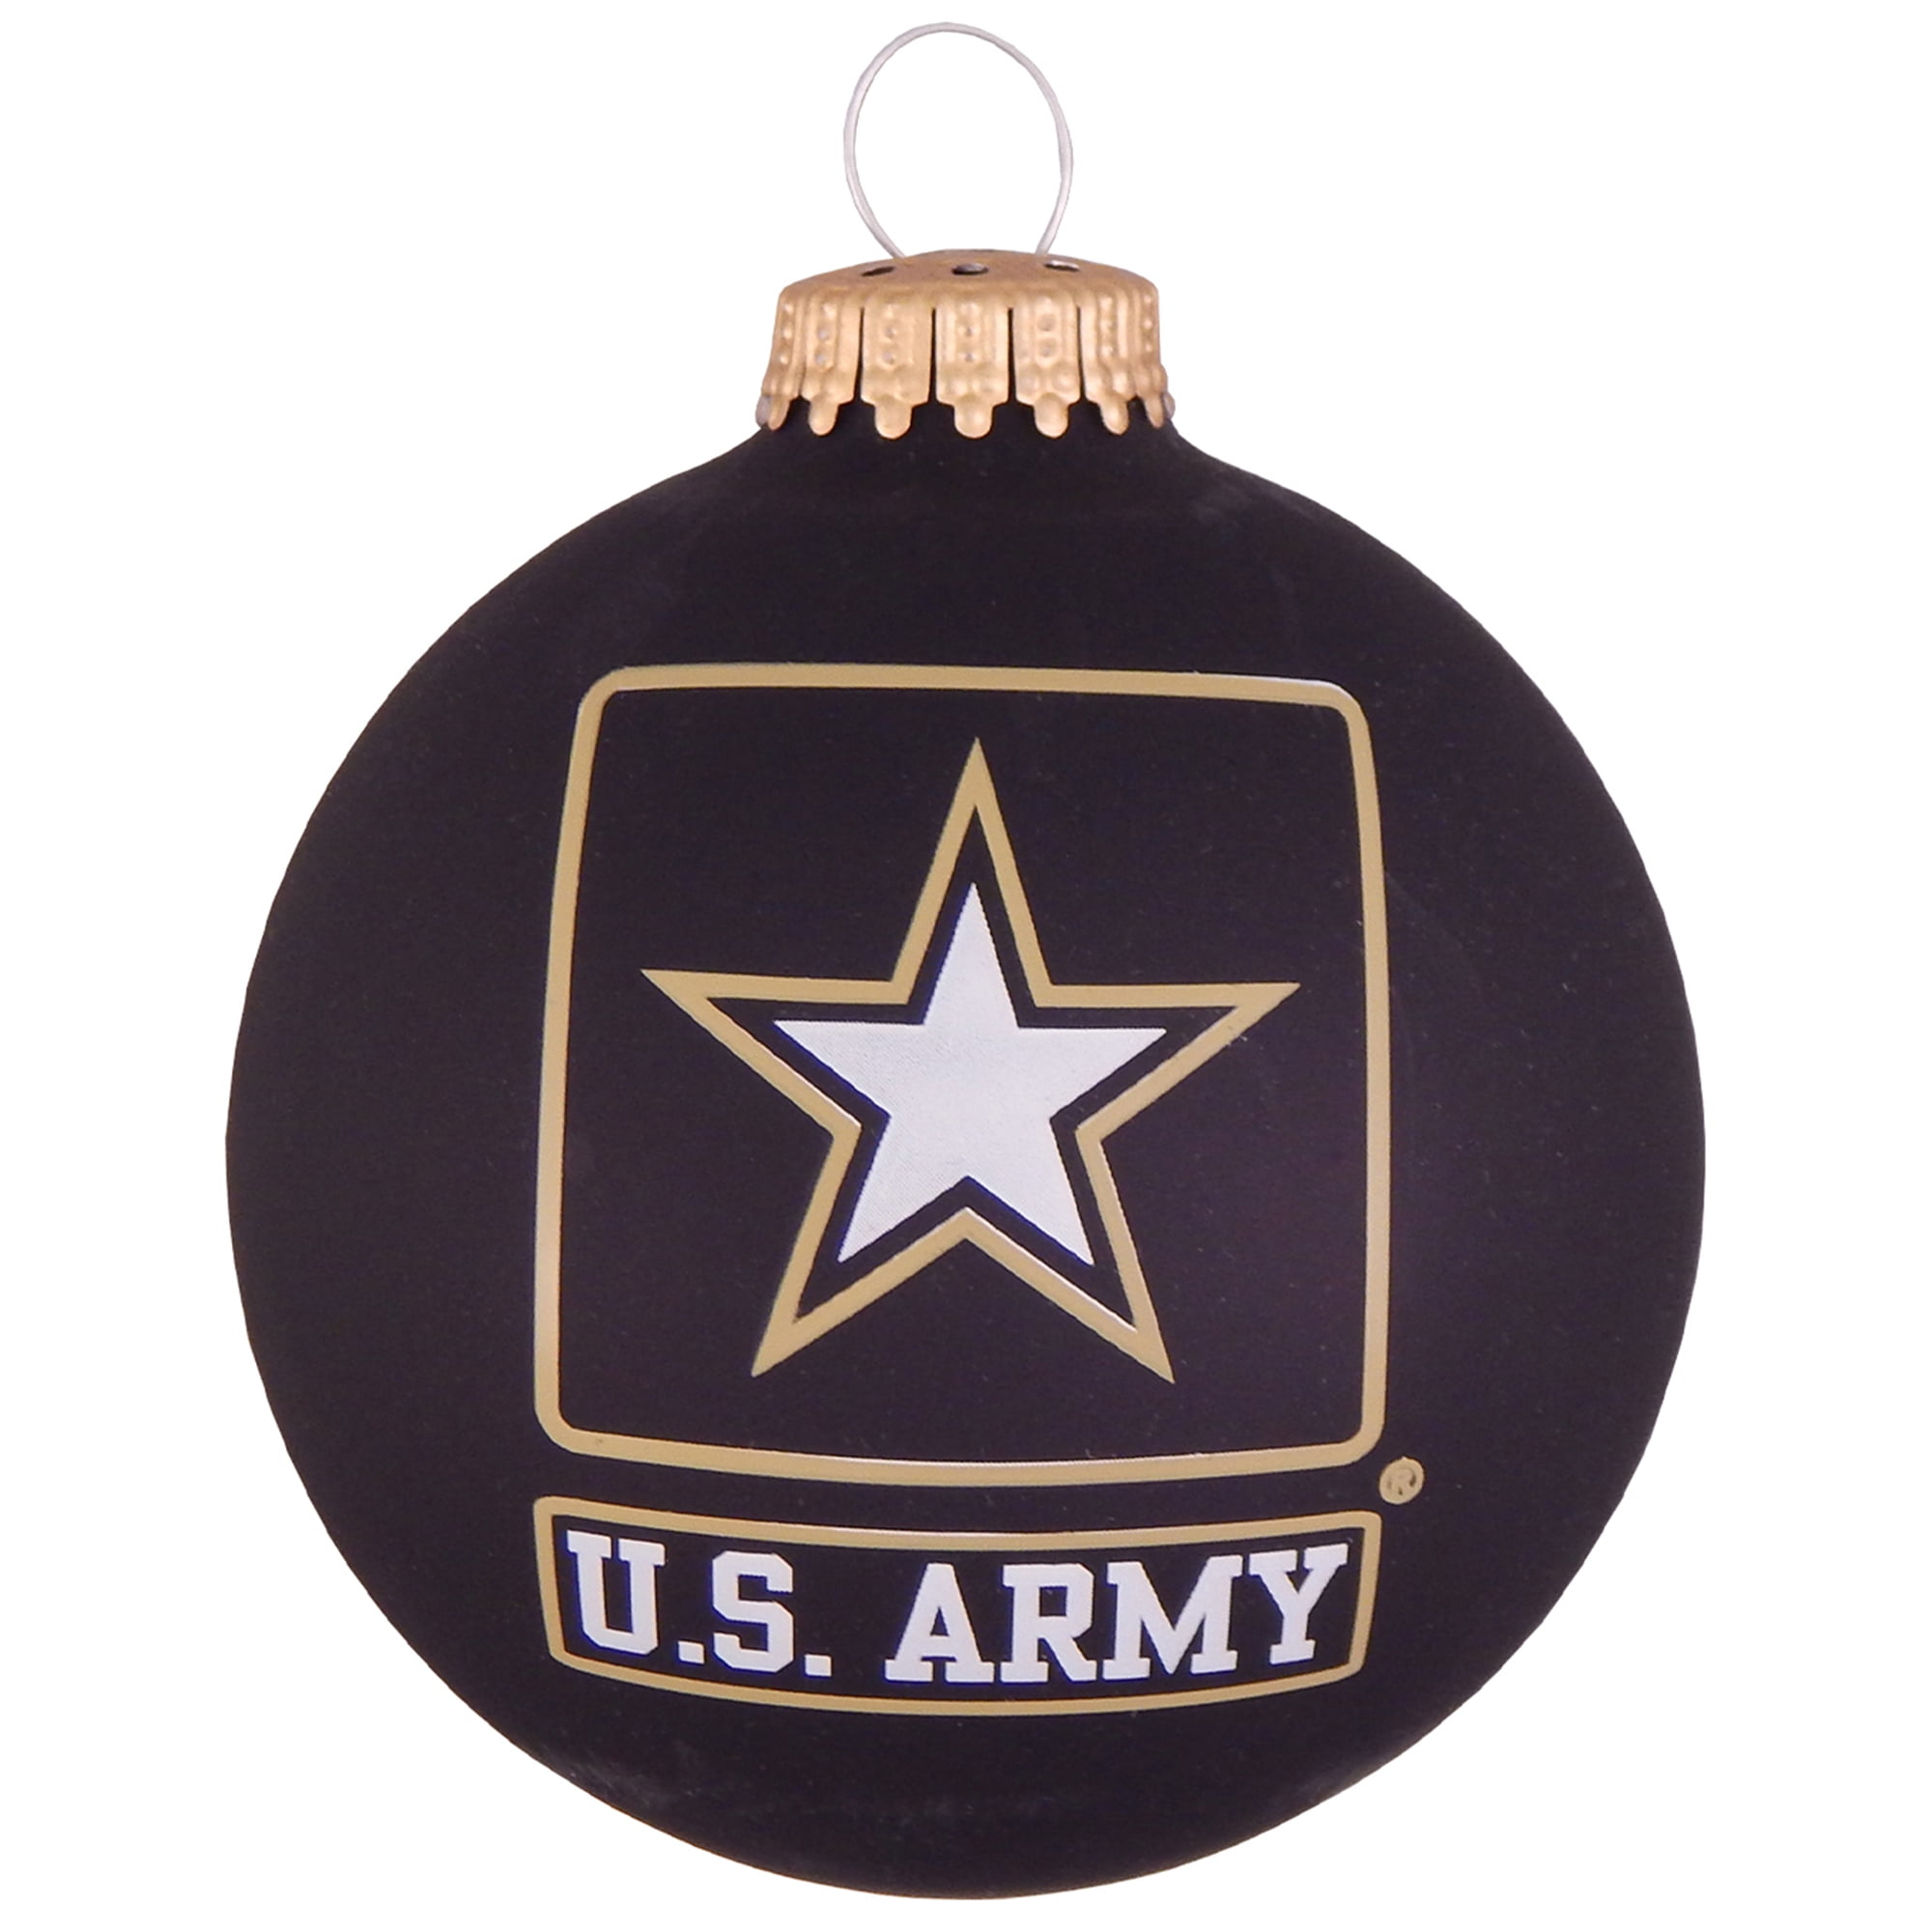 Holiday Time 3 1/4" Black Glass Ornament with Army Logo and Motto 1 Count